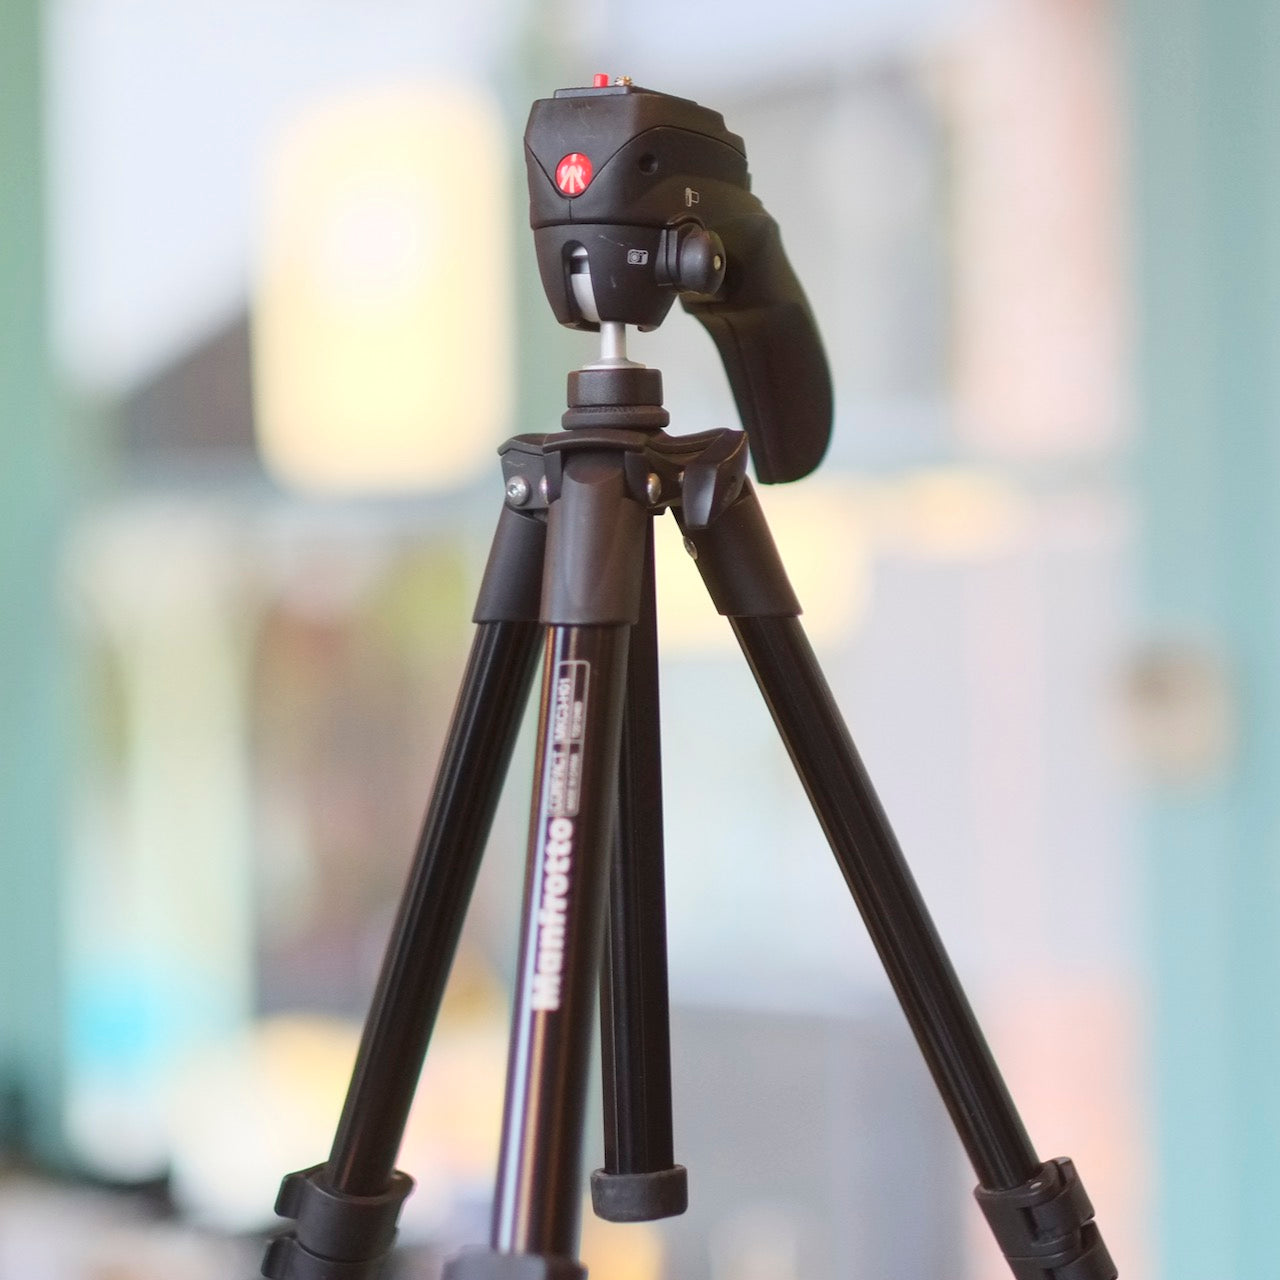 Manfrotto Compact MKC3-H01